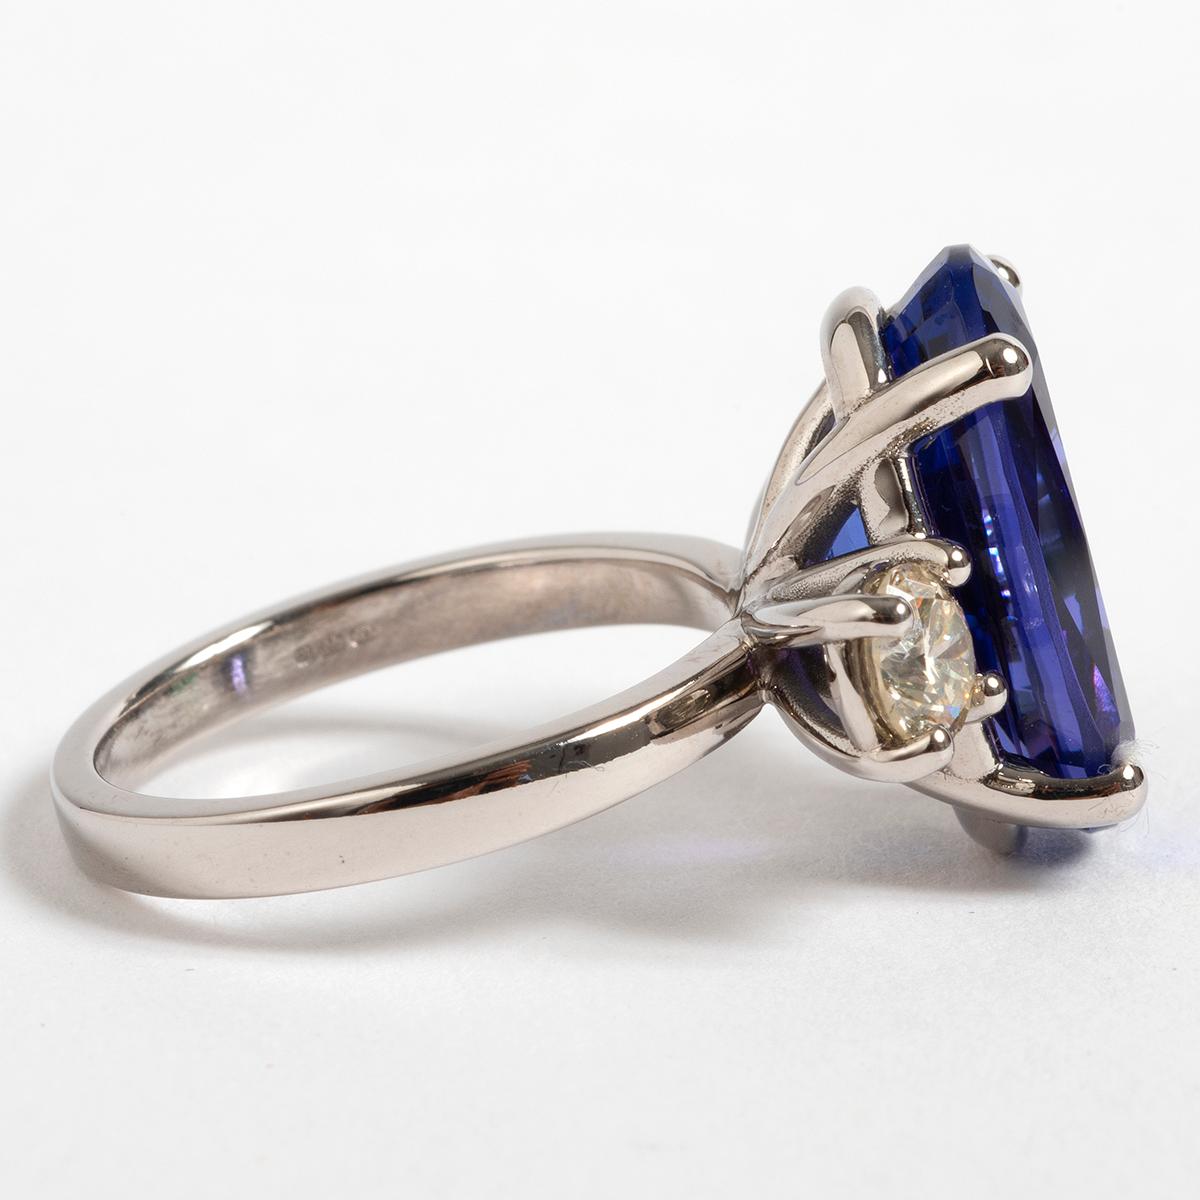 This tanzanite and diamond trilogy ring is truly a beautiful piece. Set in 18carat white gold, tanzanite is approx 7.5carat, diamond is approx 0.50carat. This ring comes in UK size L / US size 5.75.